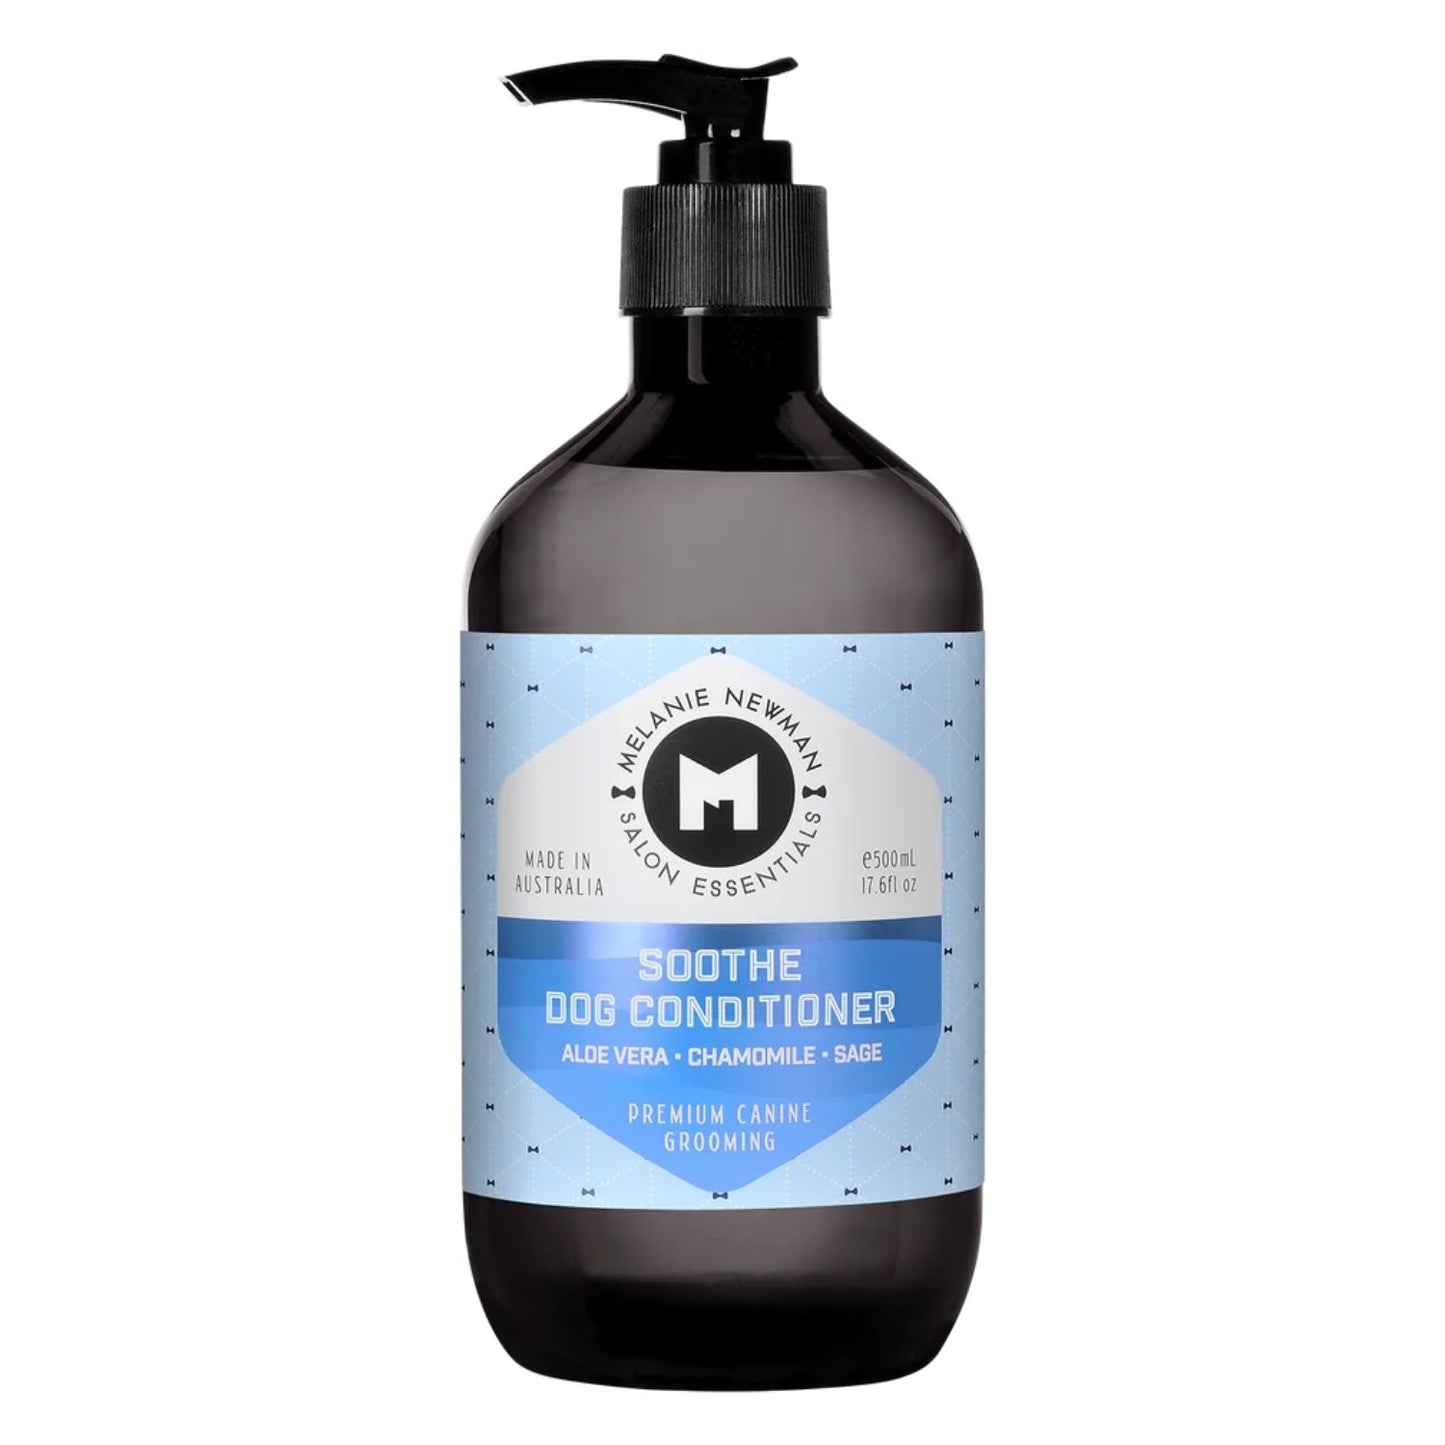 Soothe Dog Conditioner